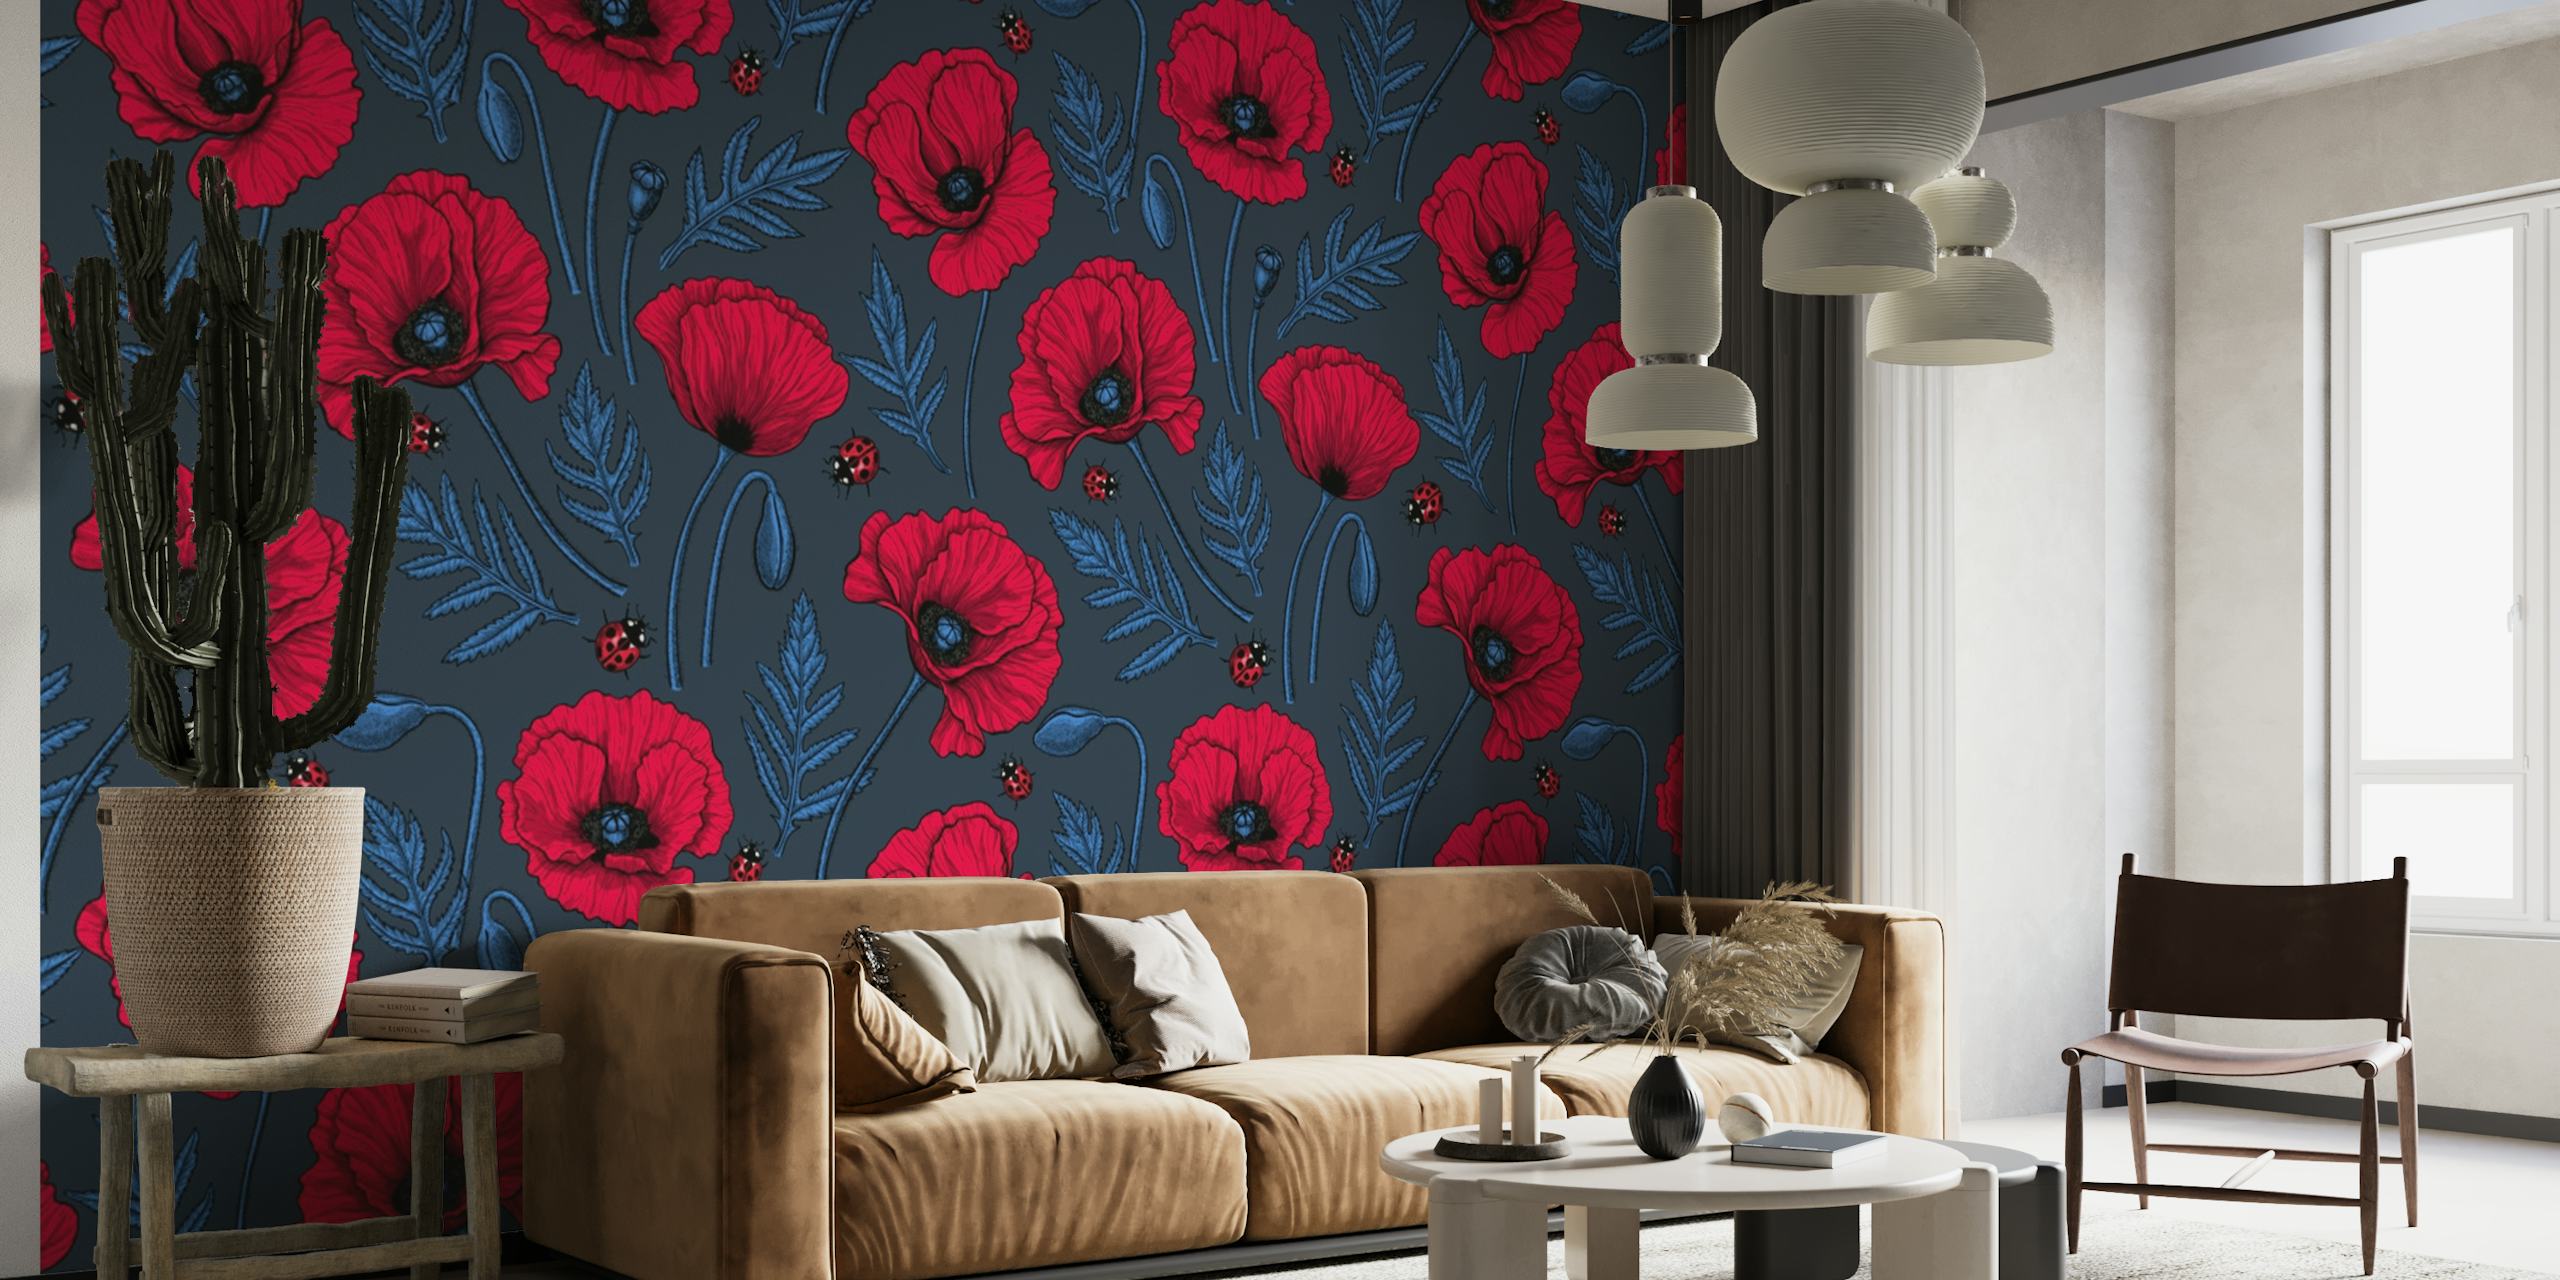 Red poppies and ladybugs wallpaper